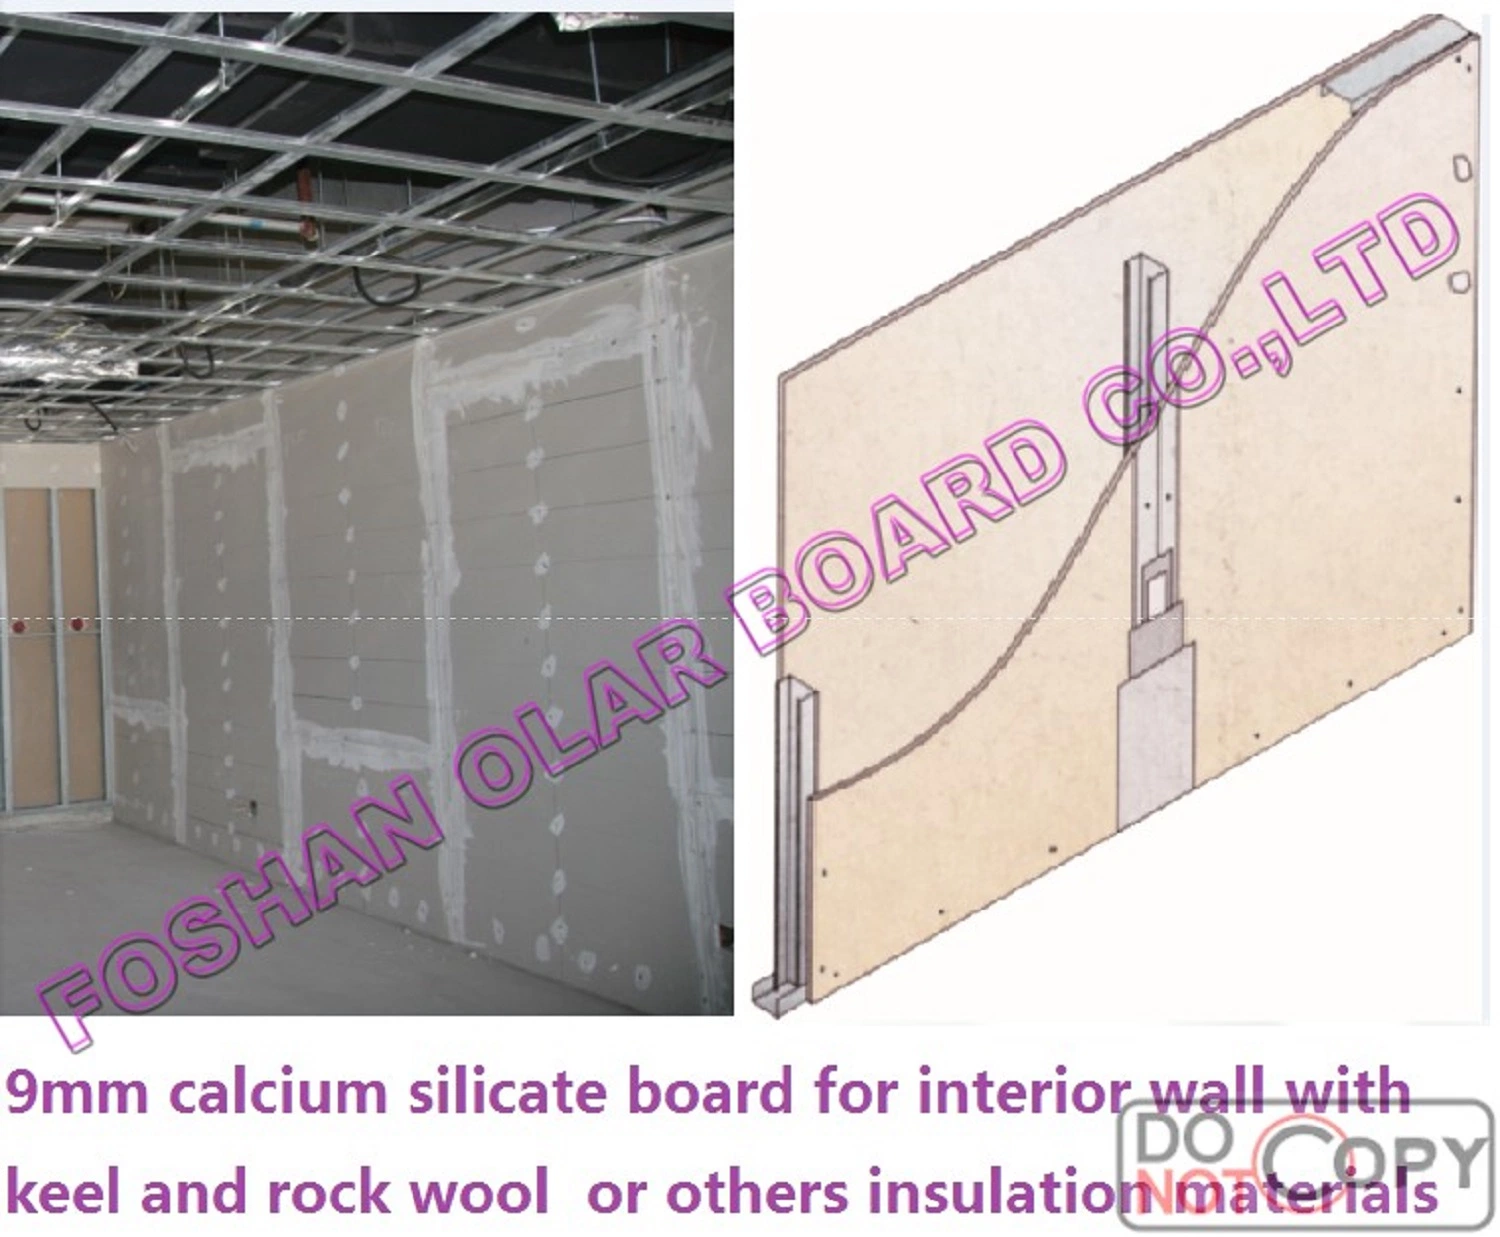 CE Certification of Calcium Silicate Board for Ceiling and Wall, Fiber Cement Board